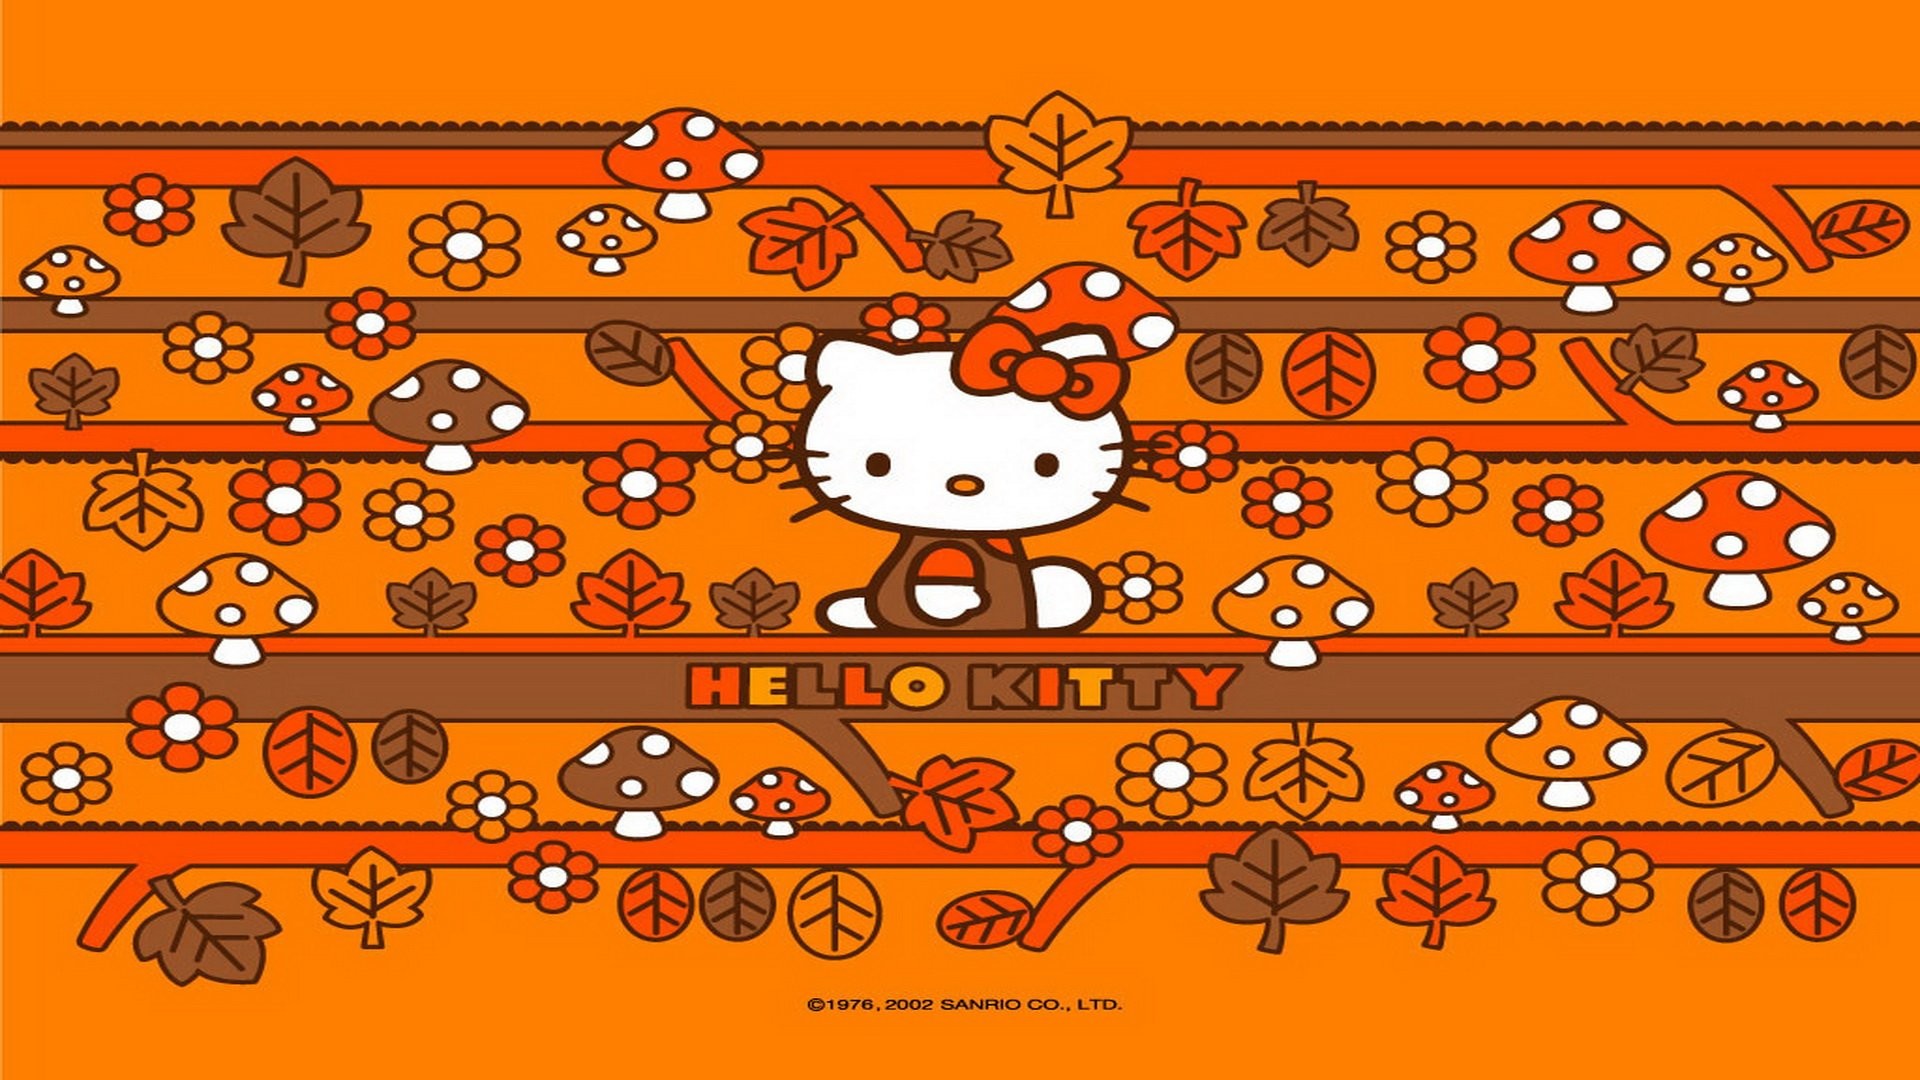 Thanksgiving Cat Wallpapers